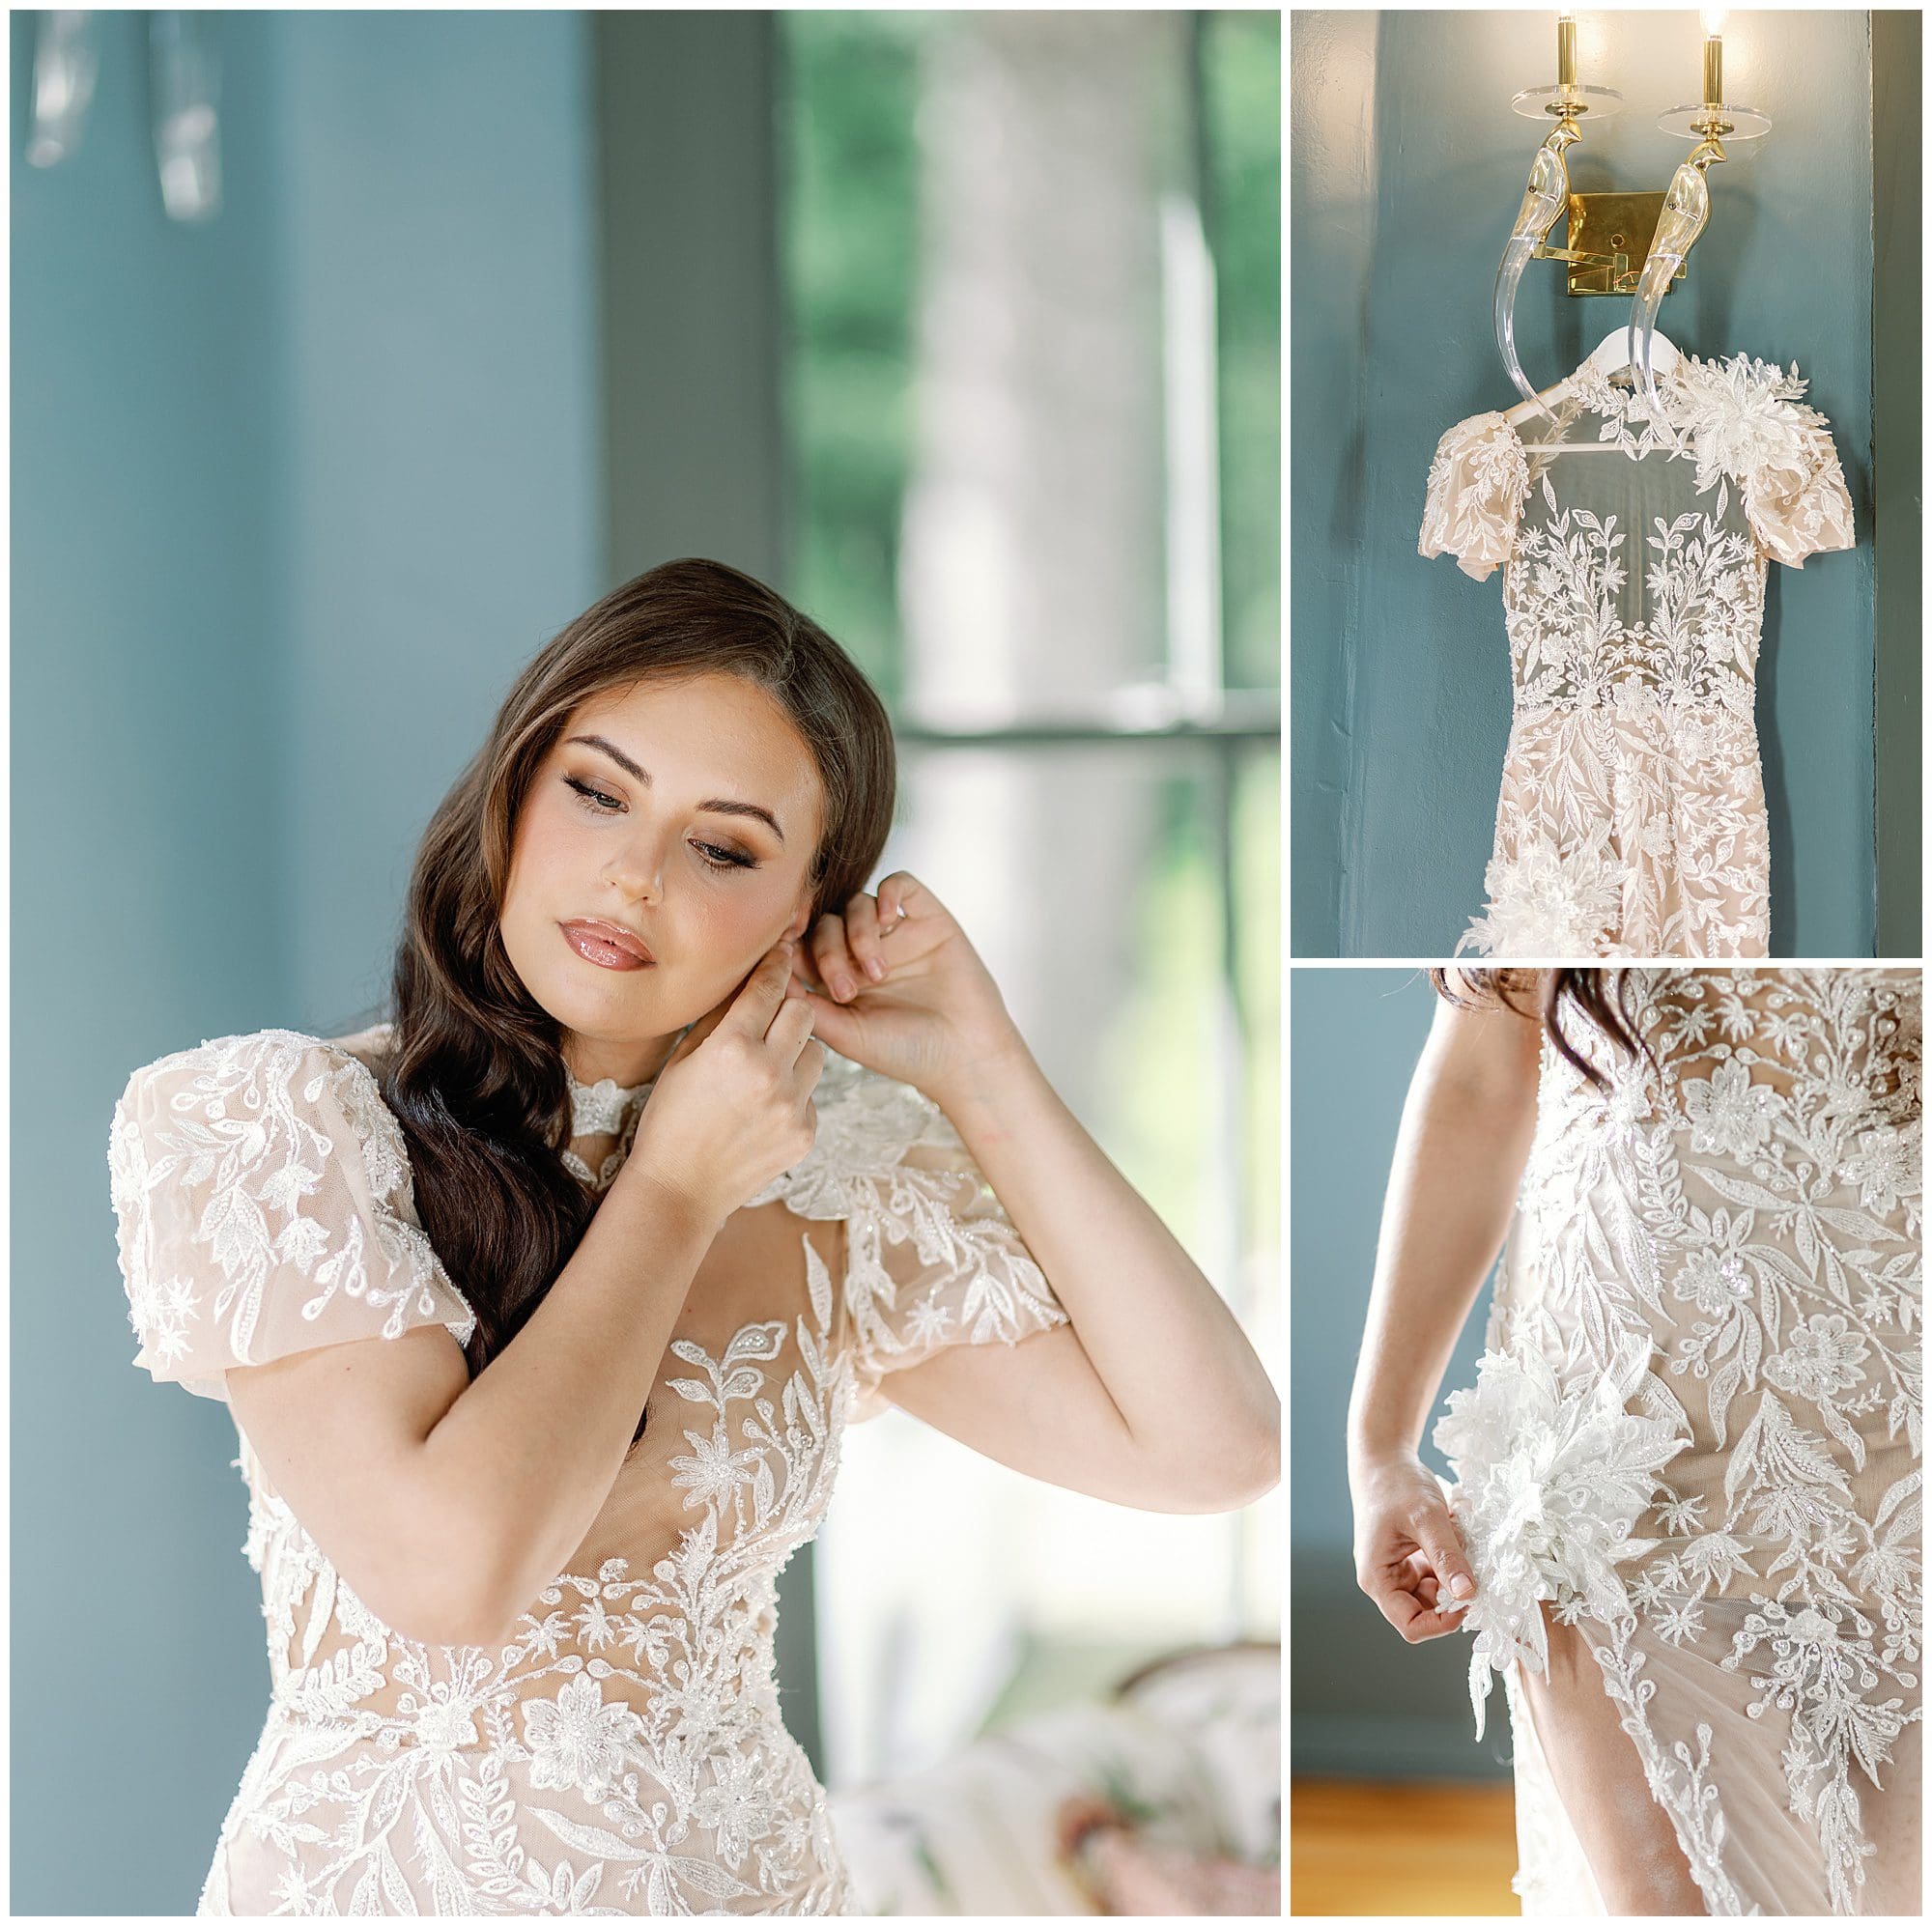 A bride is getting ready in a lace wedding dress.